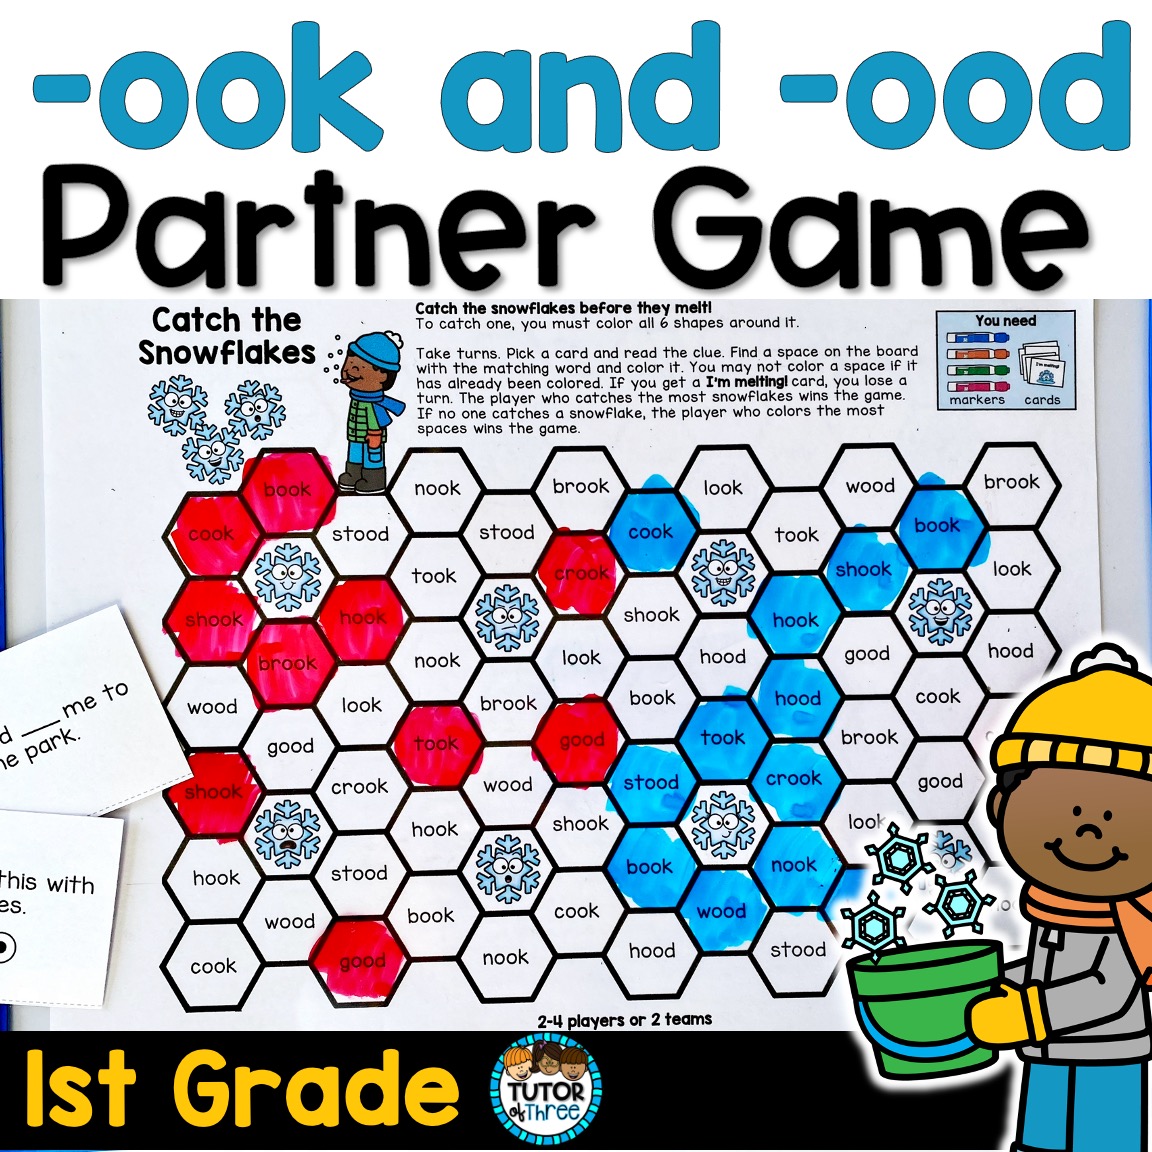 Vowel Team oo : -ook and -ood Game and Activities